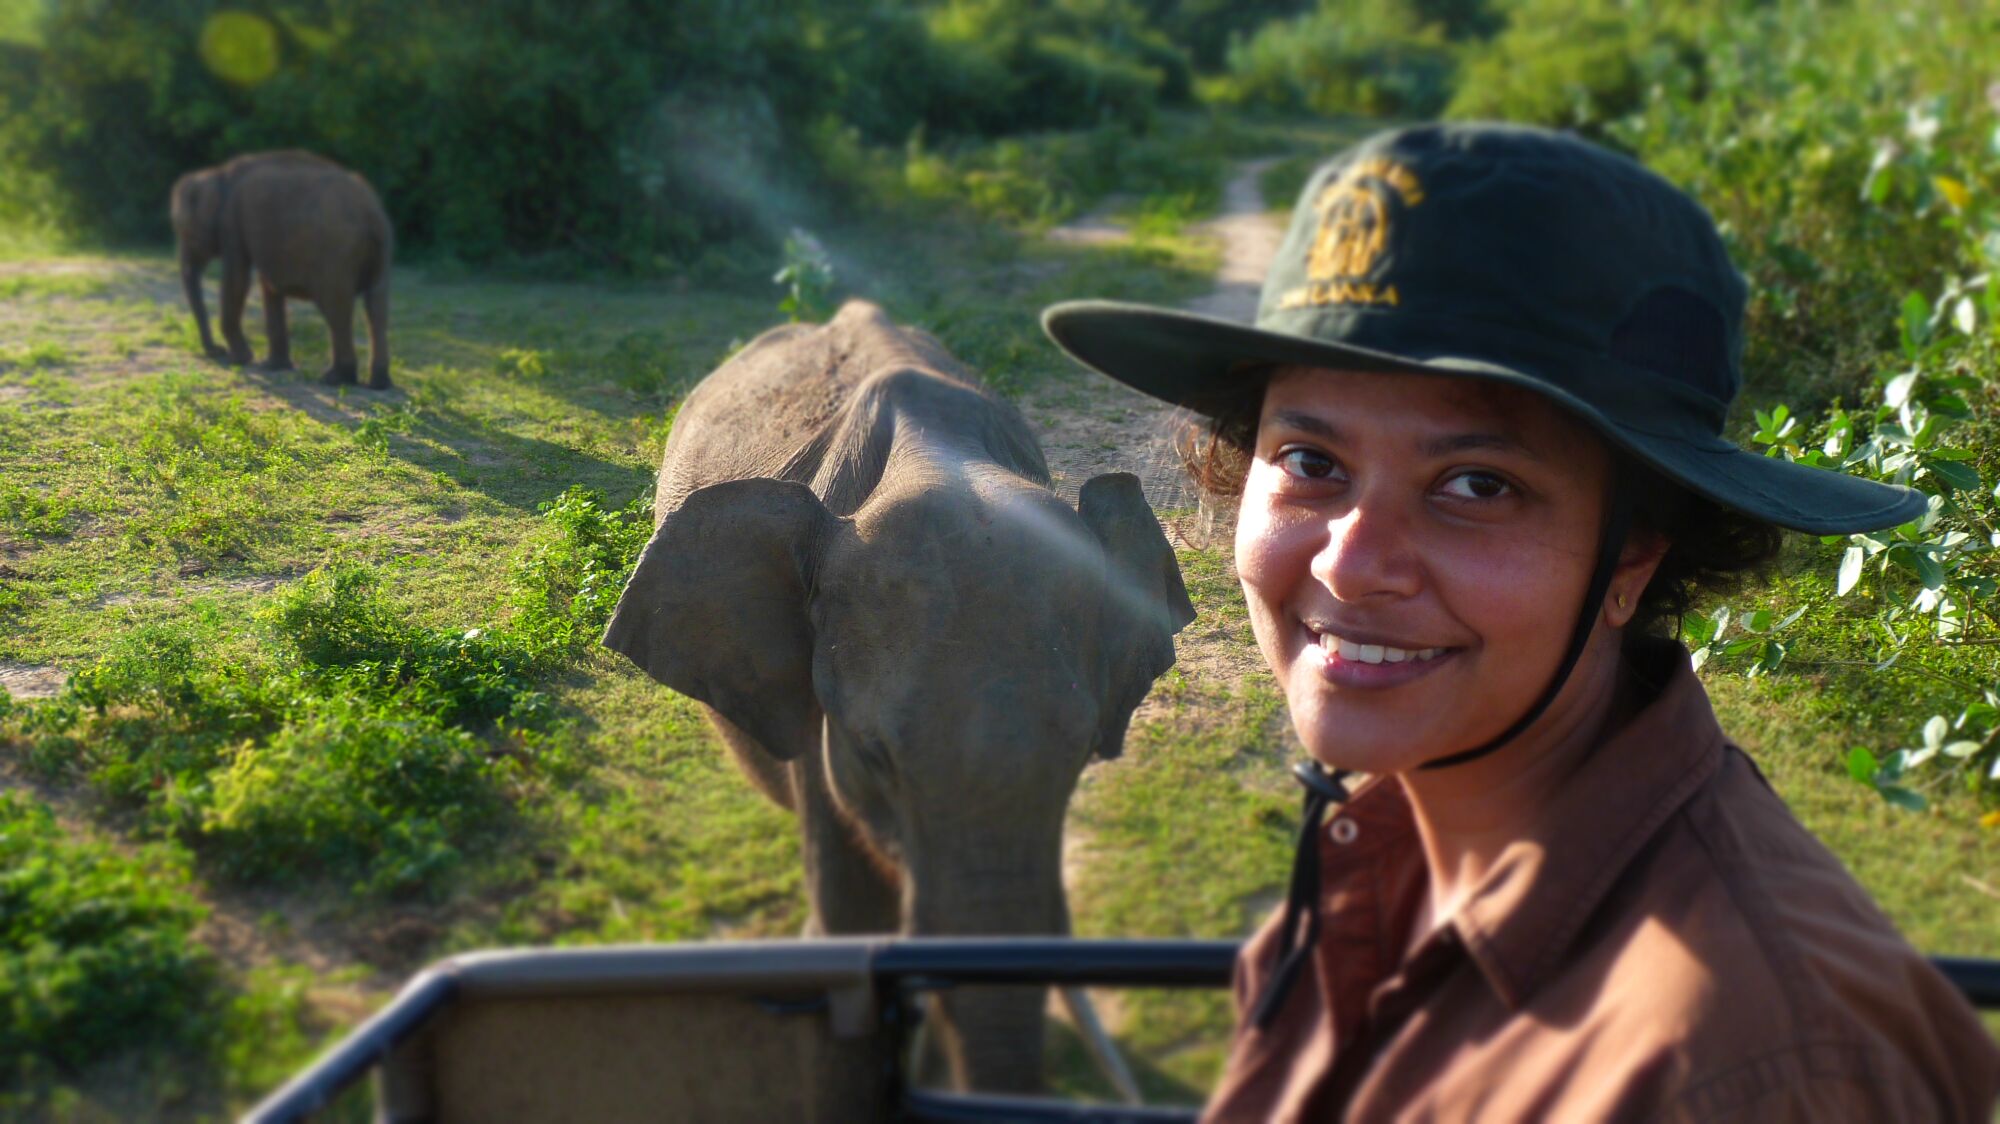 Shermin de Silva, a biologist at UC San Diego, is photographed with Asian elephants in Sri Lanka.